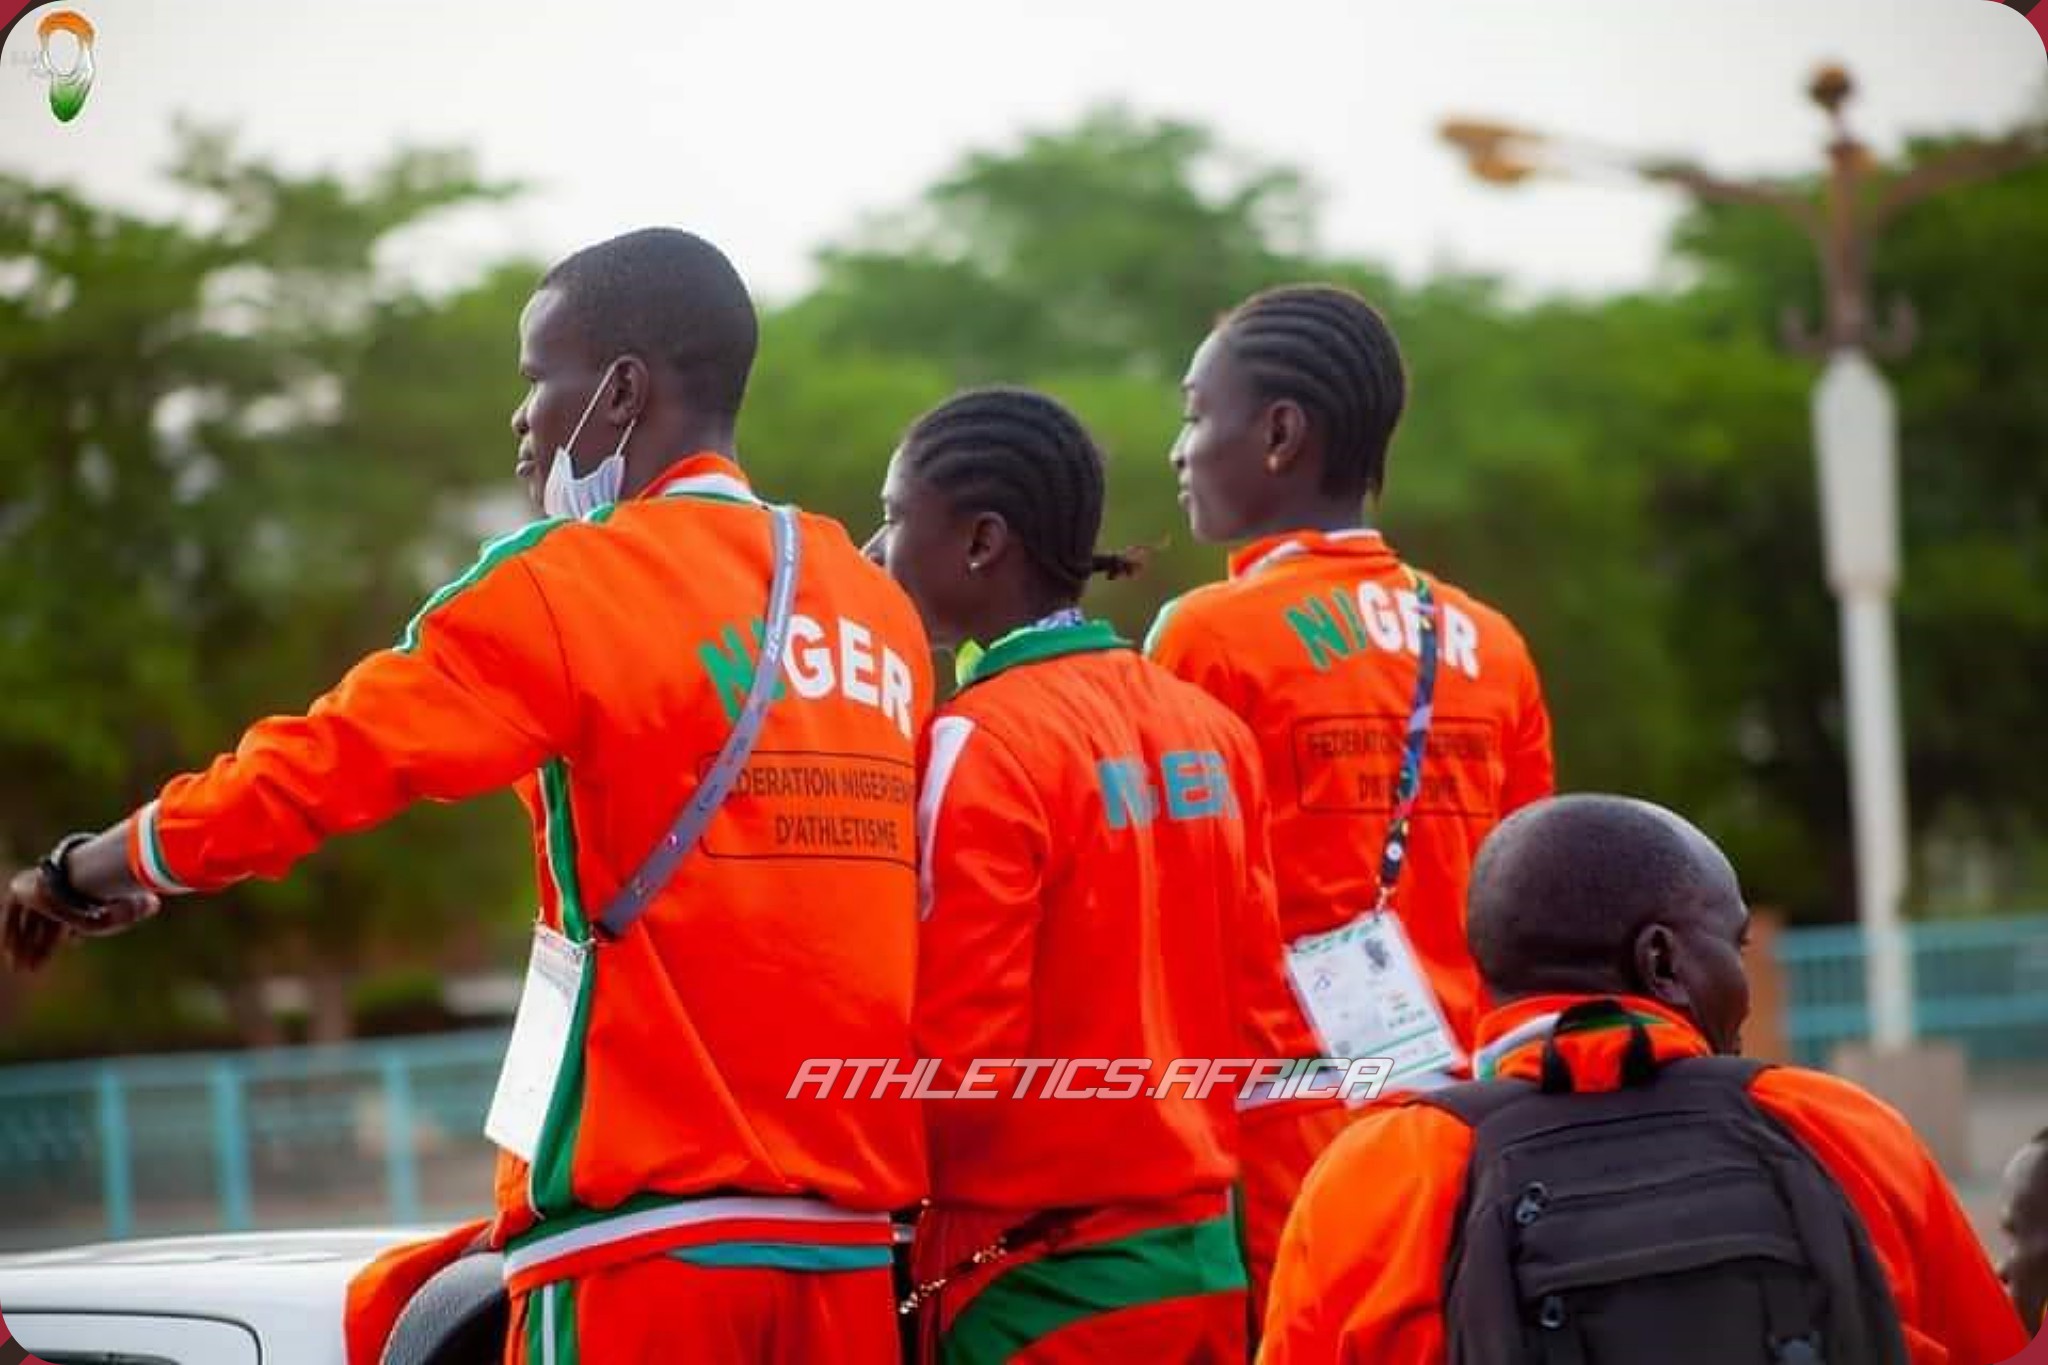 African 200m champion Aminatou Seyni and teammates arrived from Mauritius 2022 to a heroic welcome in Niger / Photo credit: Mami Seyni